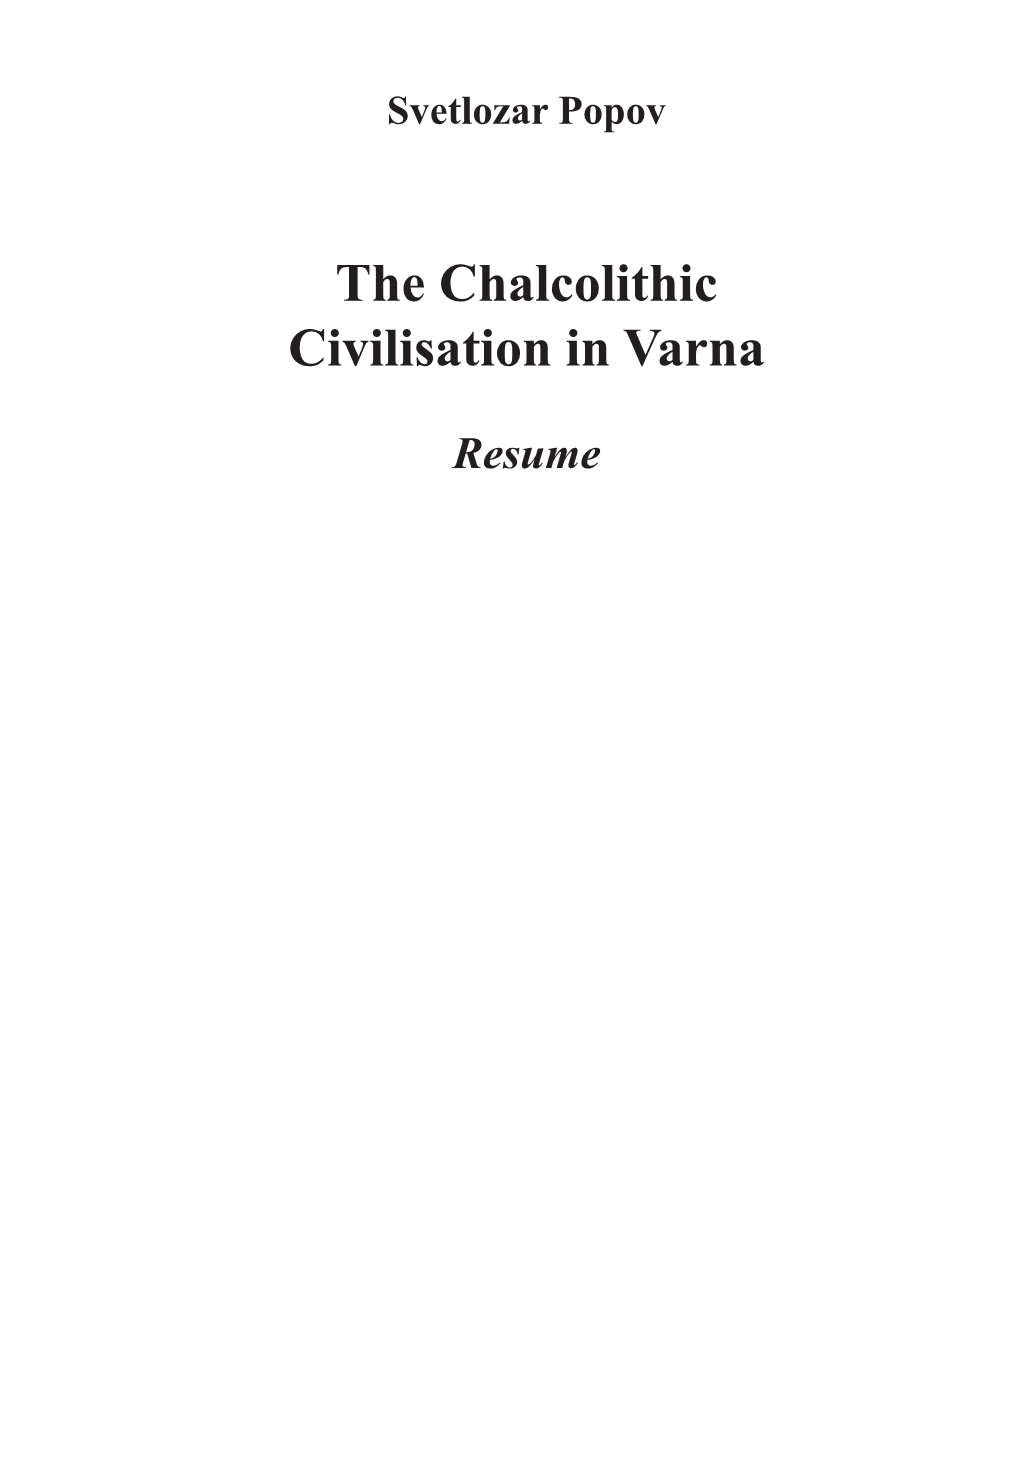 The Chalcolithic Civilisation in Varna